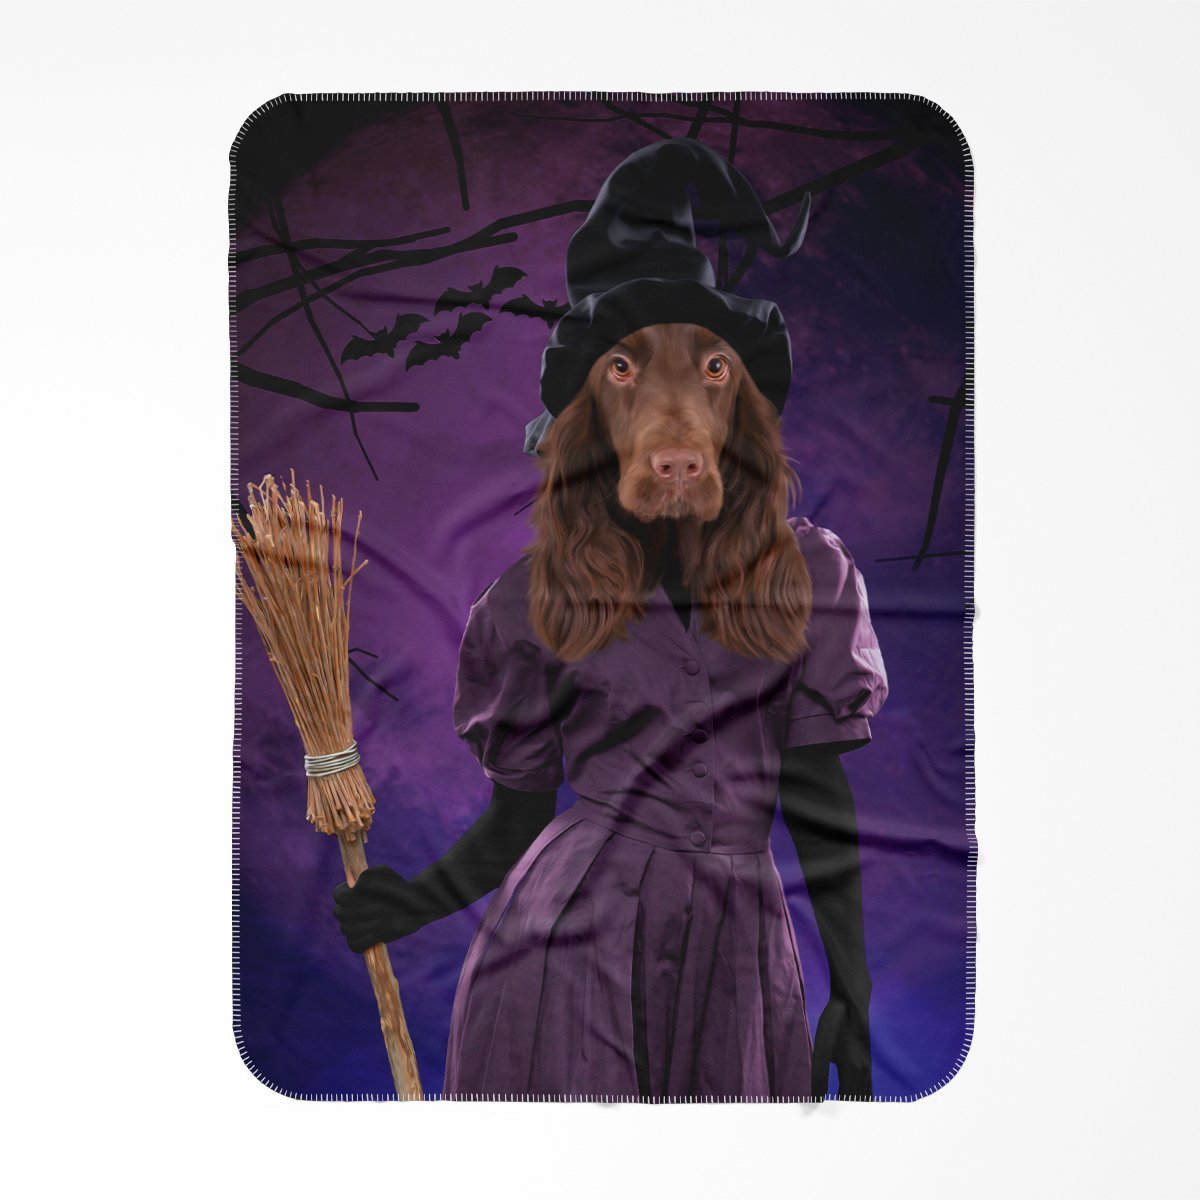 The Witch: Custom Pet Blanket - Paw & Glory - #pet portraits# - #dog portraits# - #pet portraits uk#Pawandglory, Pet art blanket,blankets with dog pictures on them, custom pup blanket, photo blanket dog, canvas dog blanket, your dog's face on a blanket